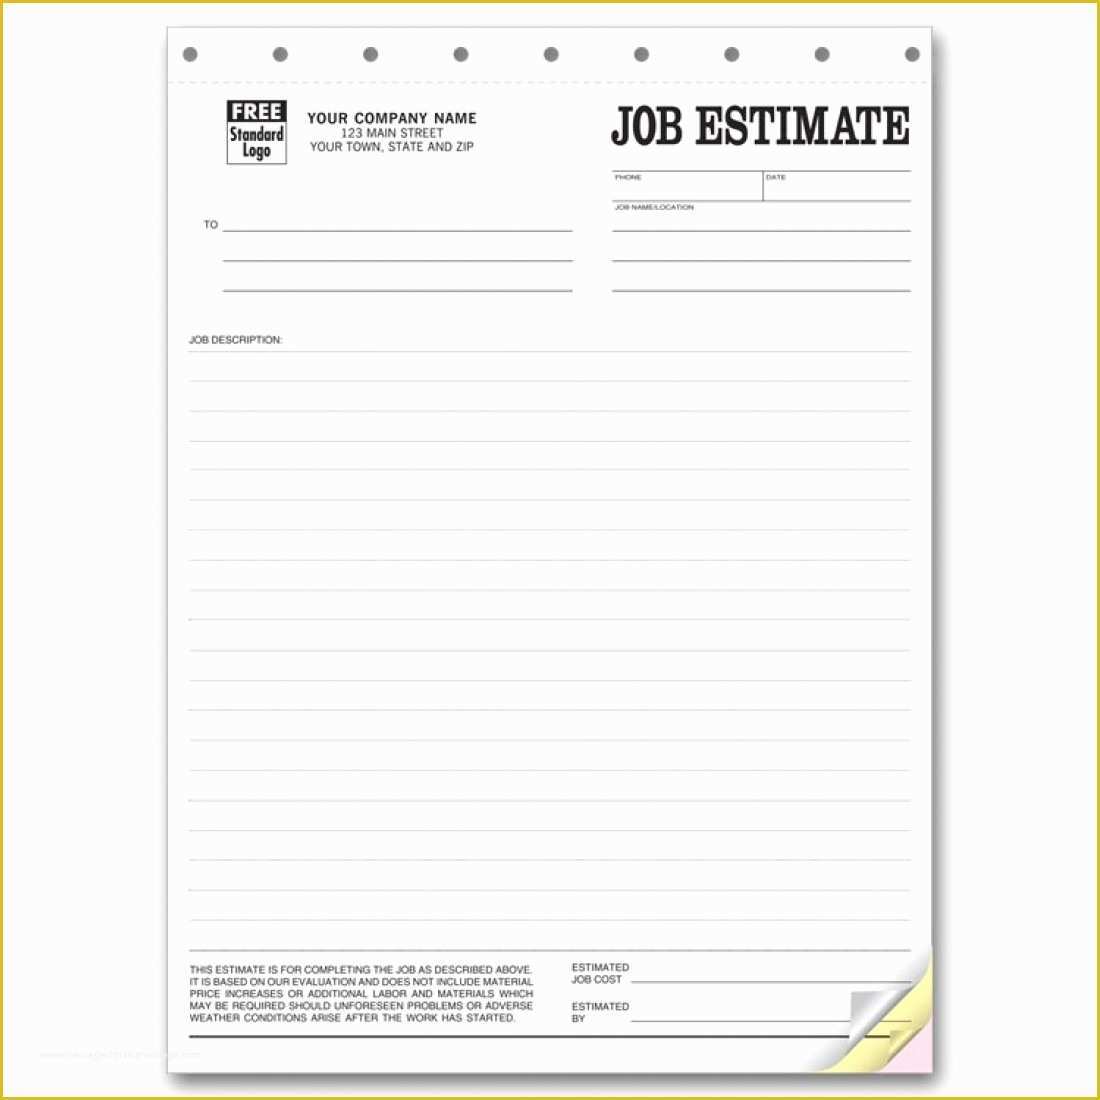 Free Work Estimate Template Of X Drag to View Zoom In Zoom Out Reset